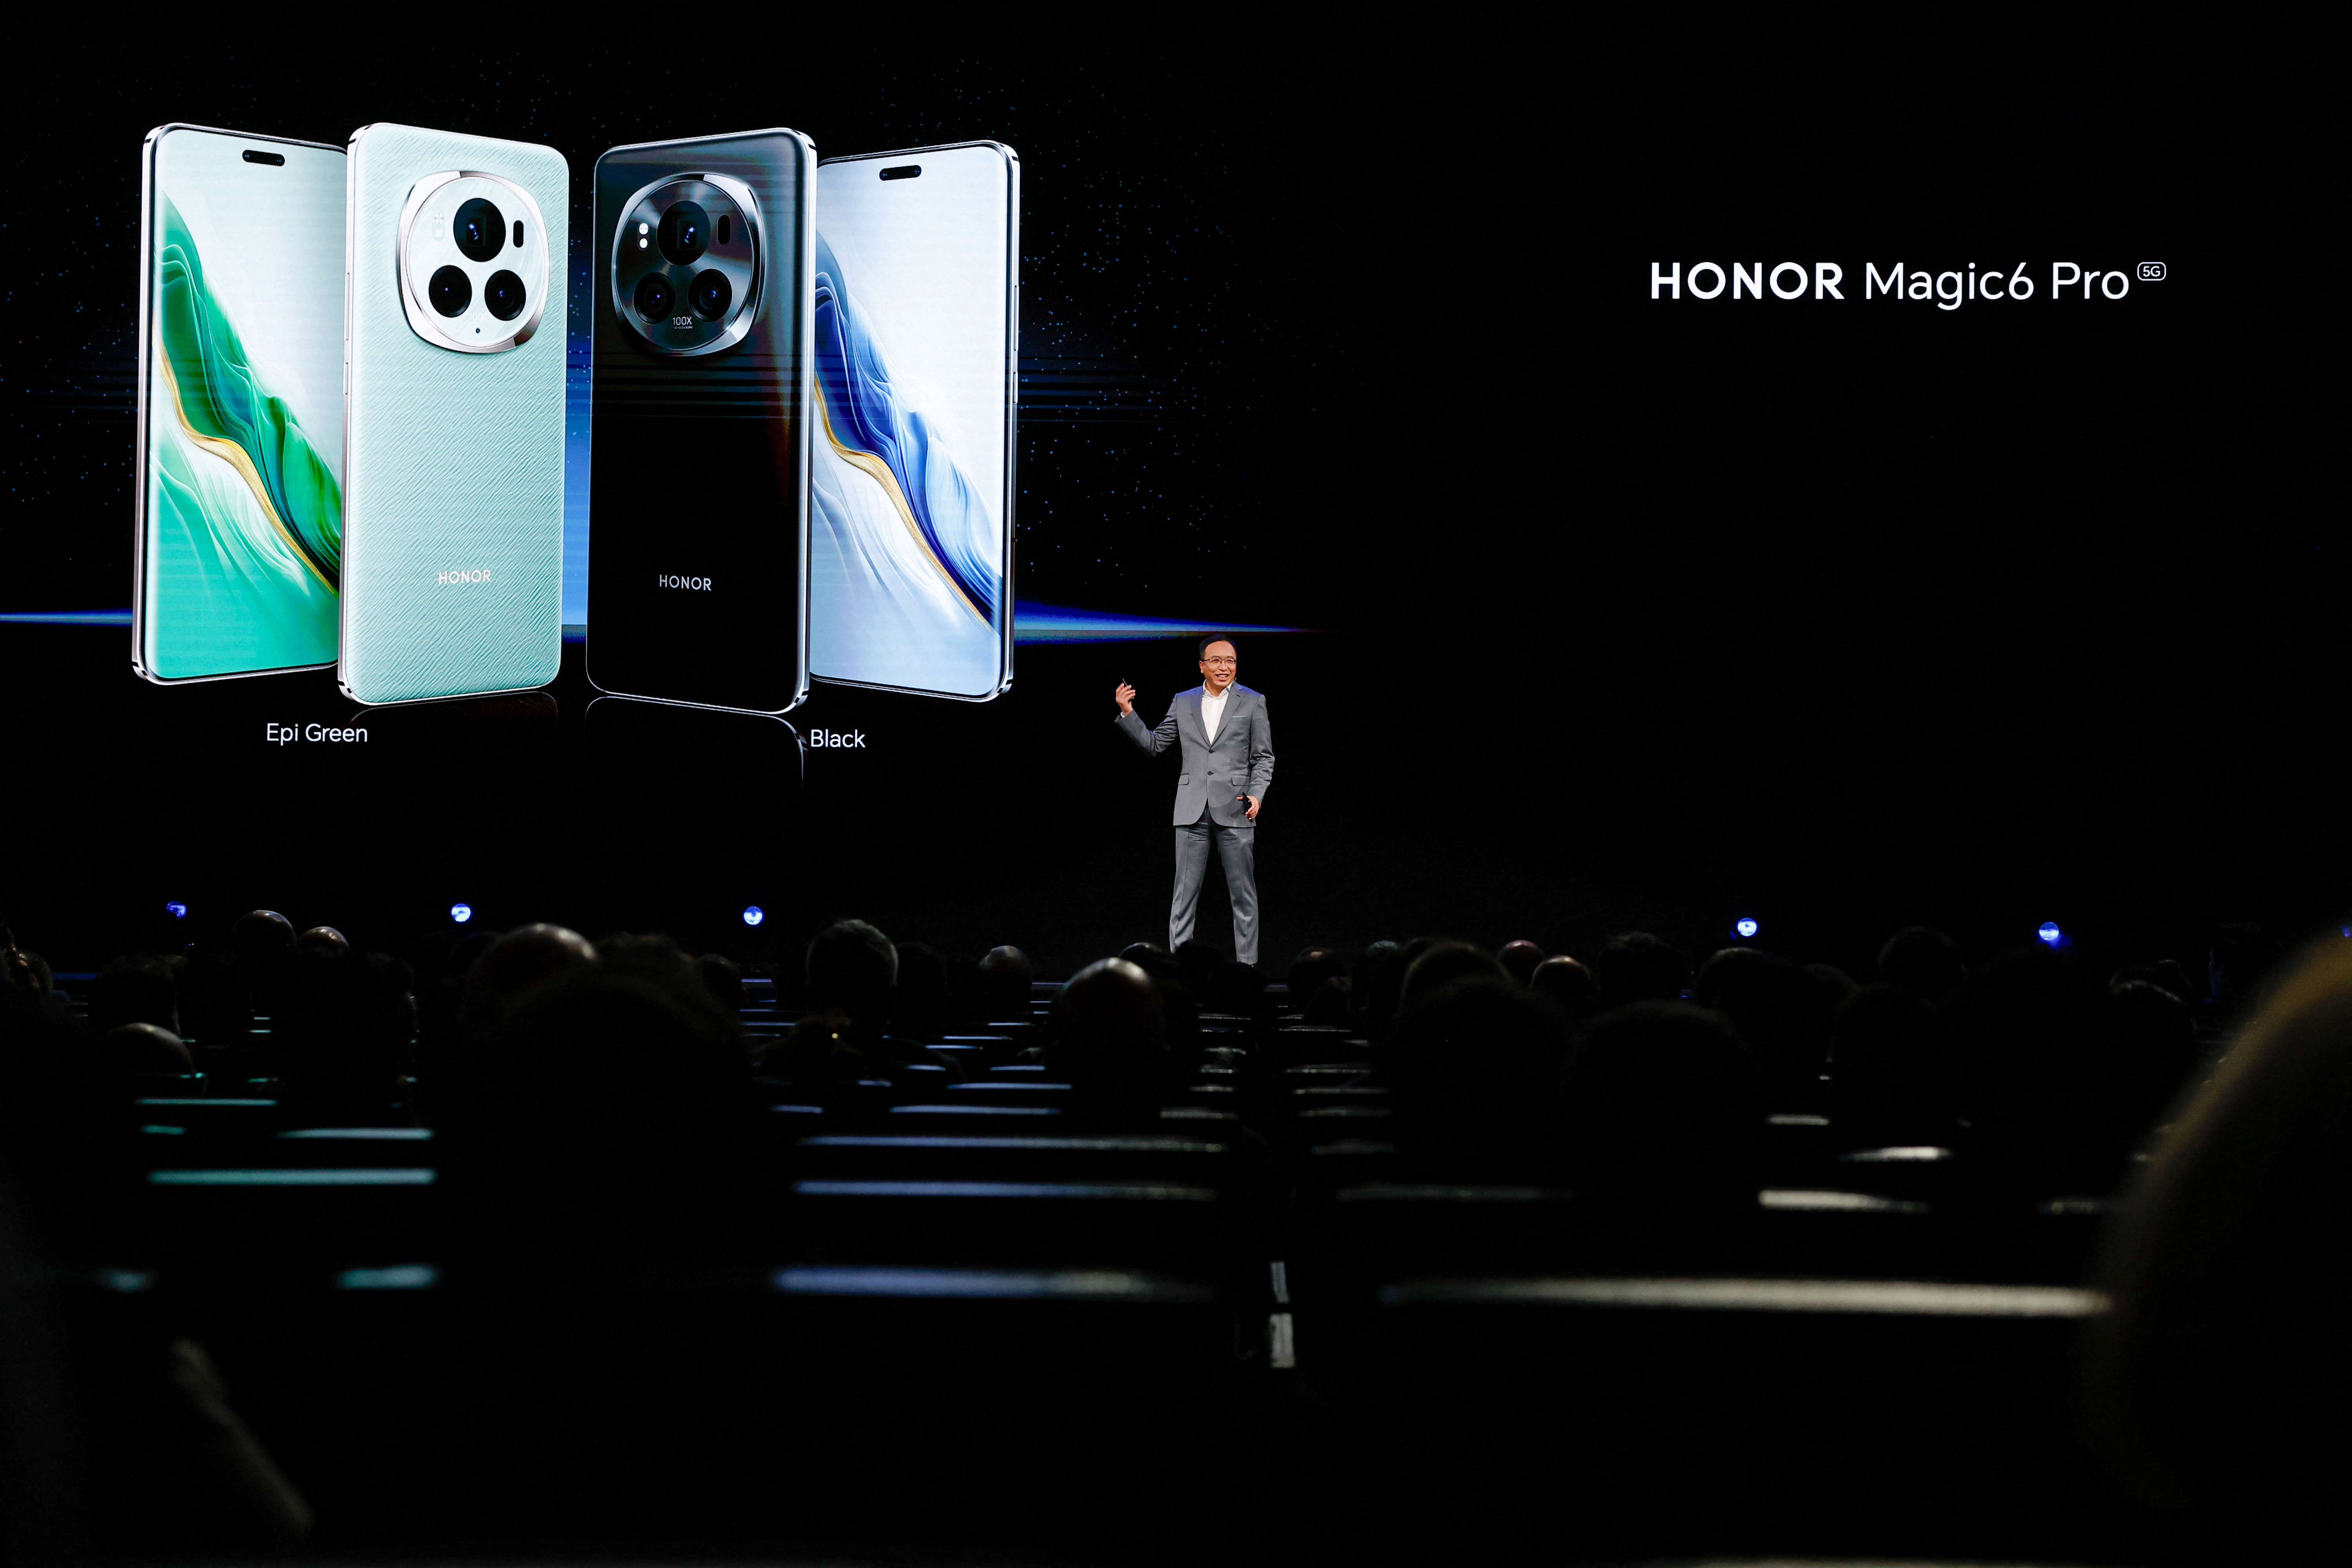 Honor Magic 6 series set to launch soon with new Android skin